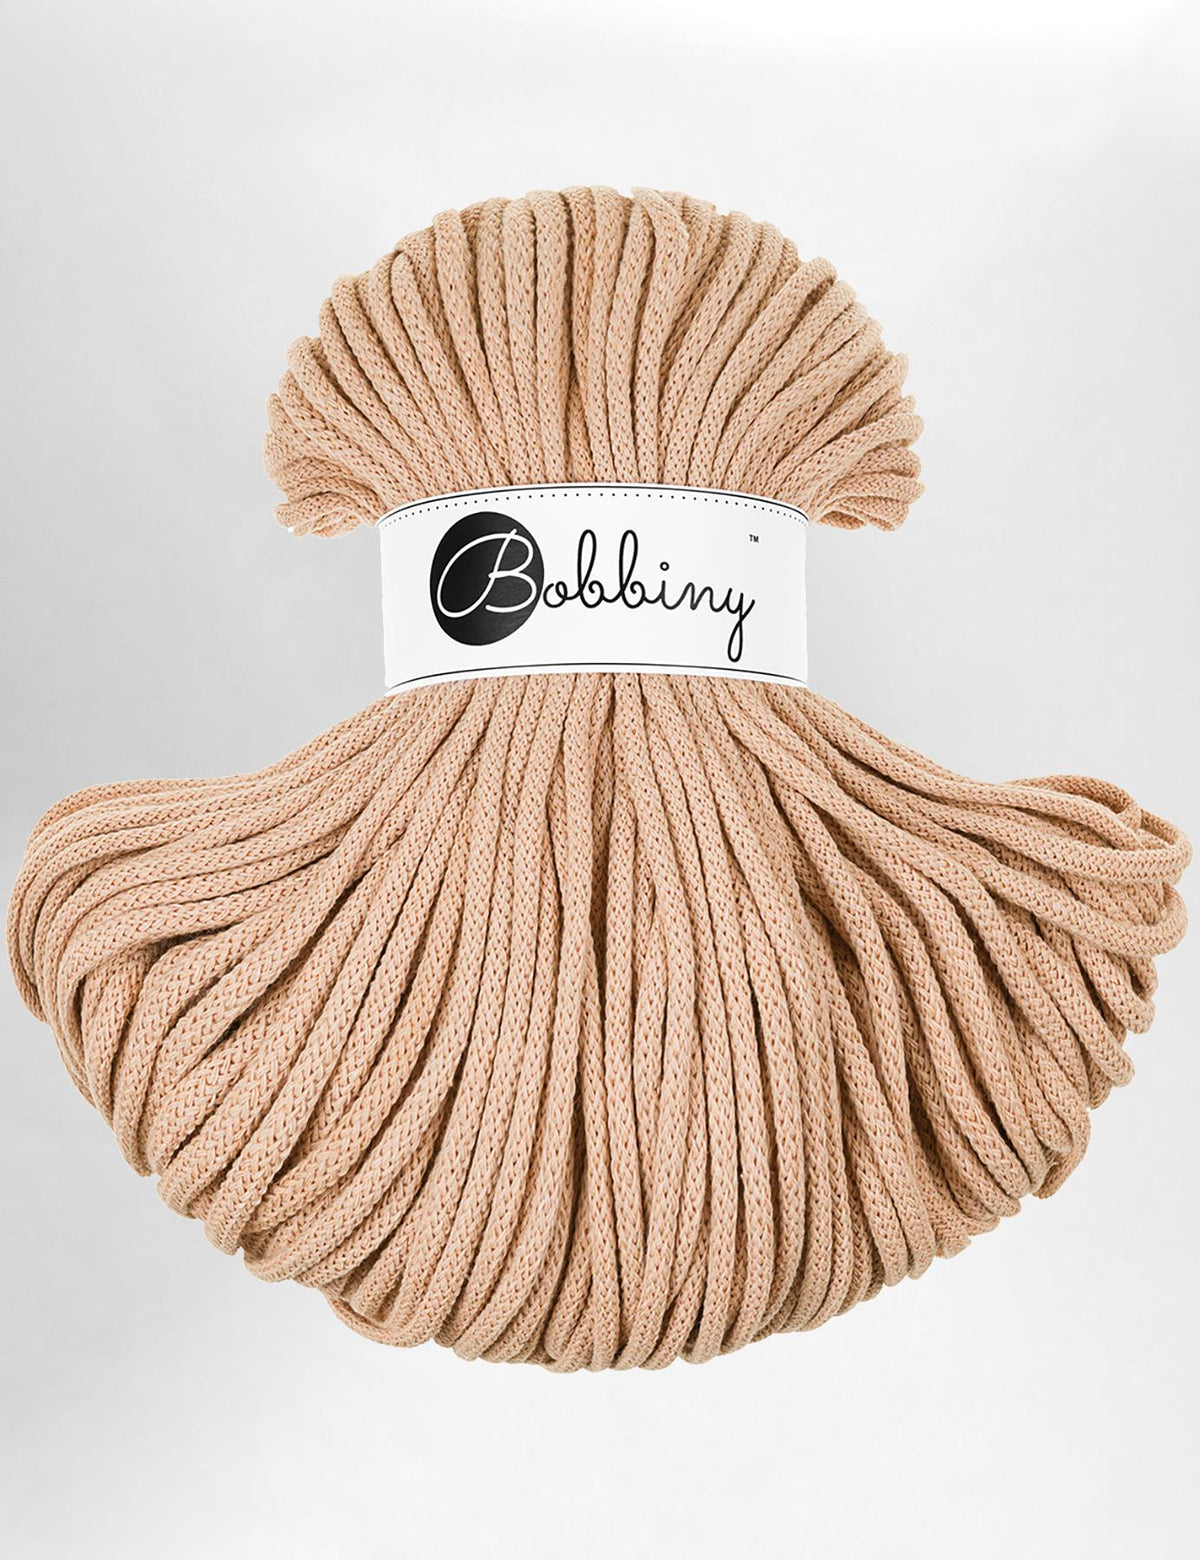 5mm Biscuit recycled cotton macrame cord by Bobbiny (100m)